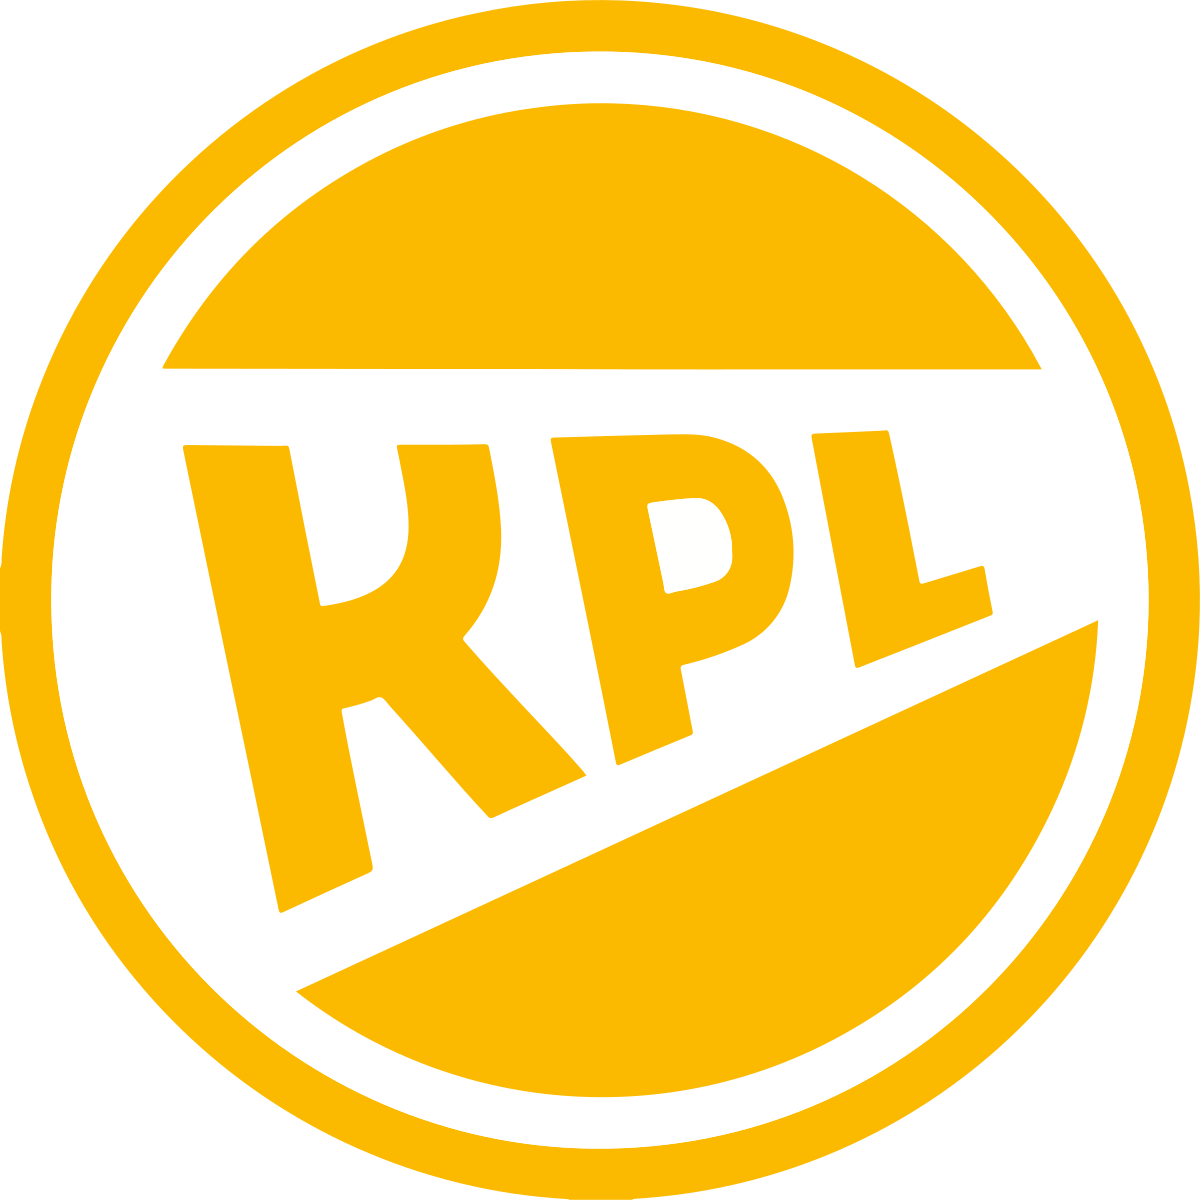 Kpl Logo Templates PSD, 1,000+ High Quality Free PSD Templates for Download